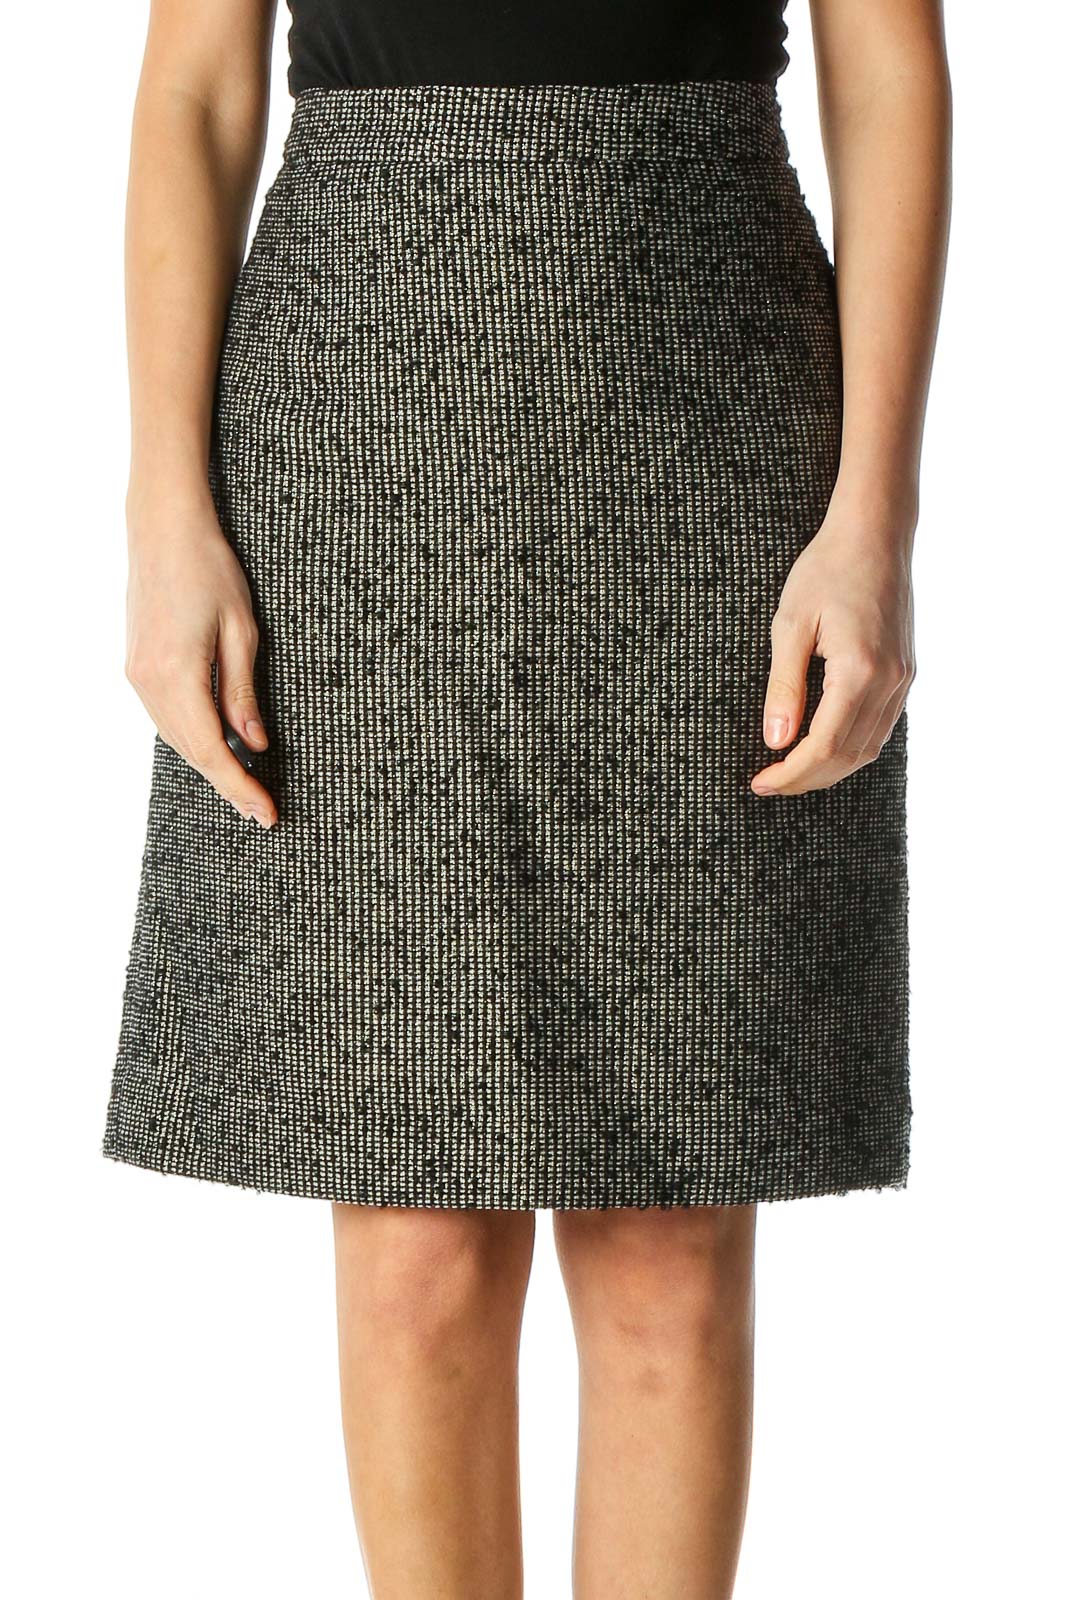 Black Textured Classic A-Line Skirt Front